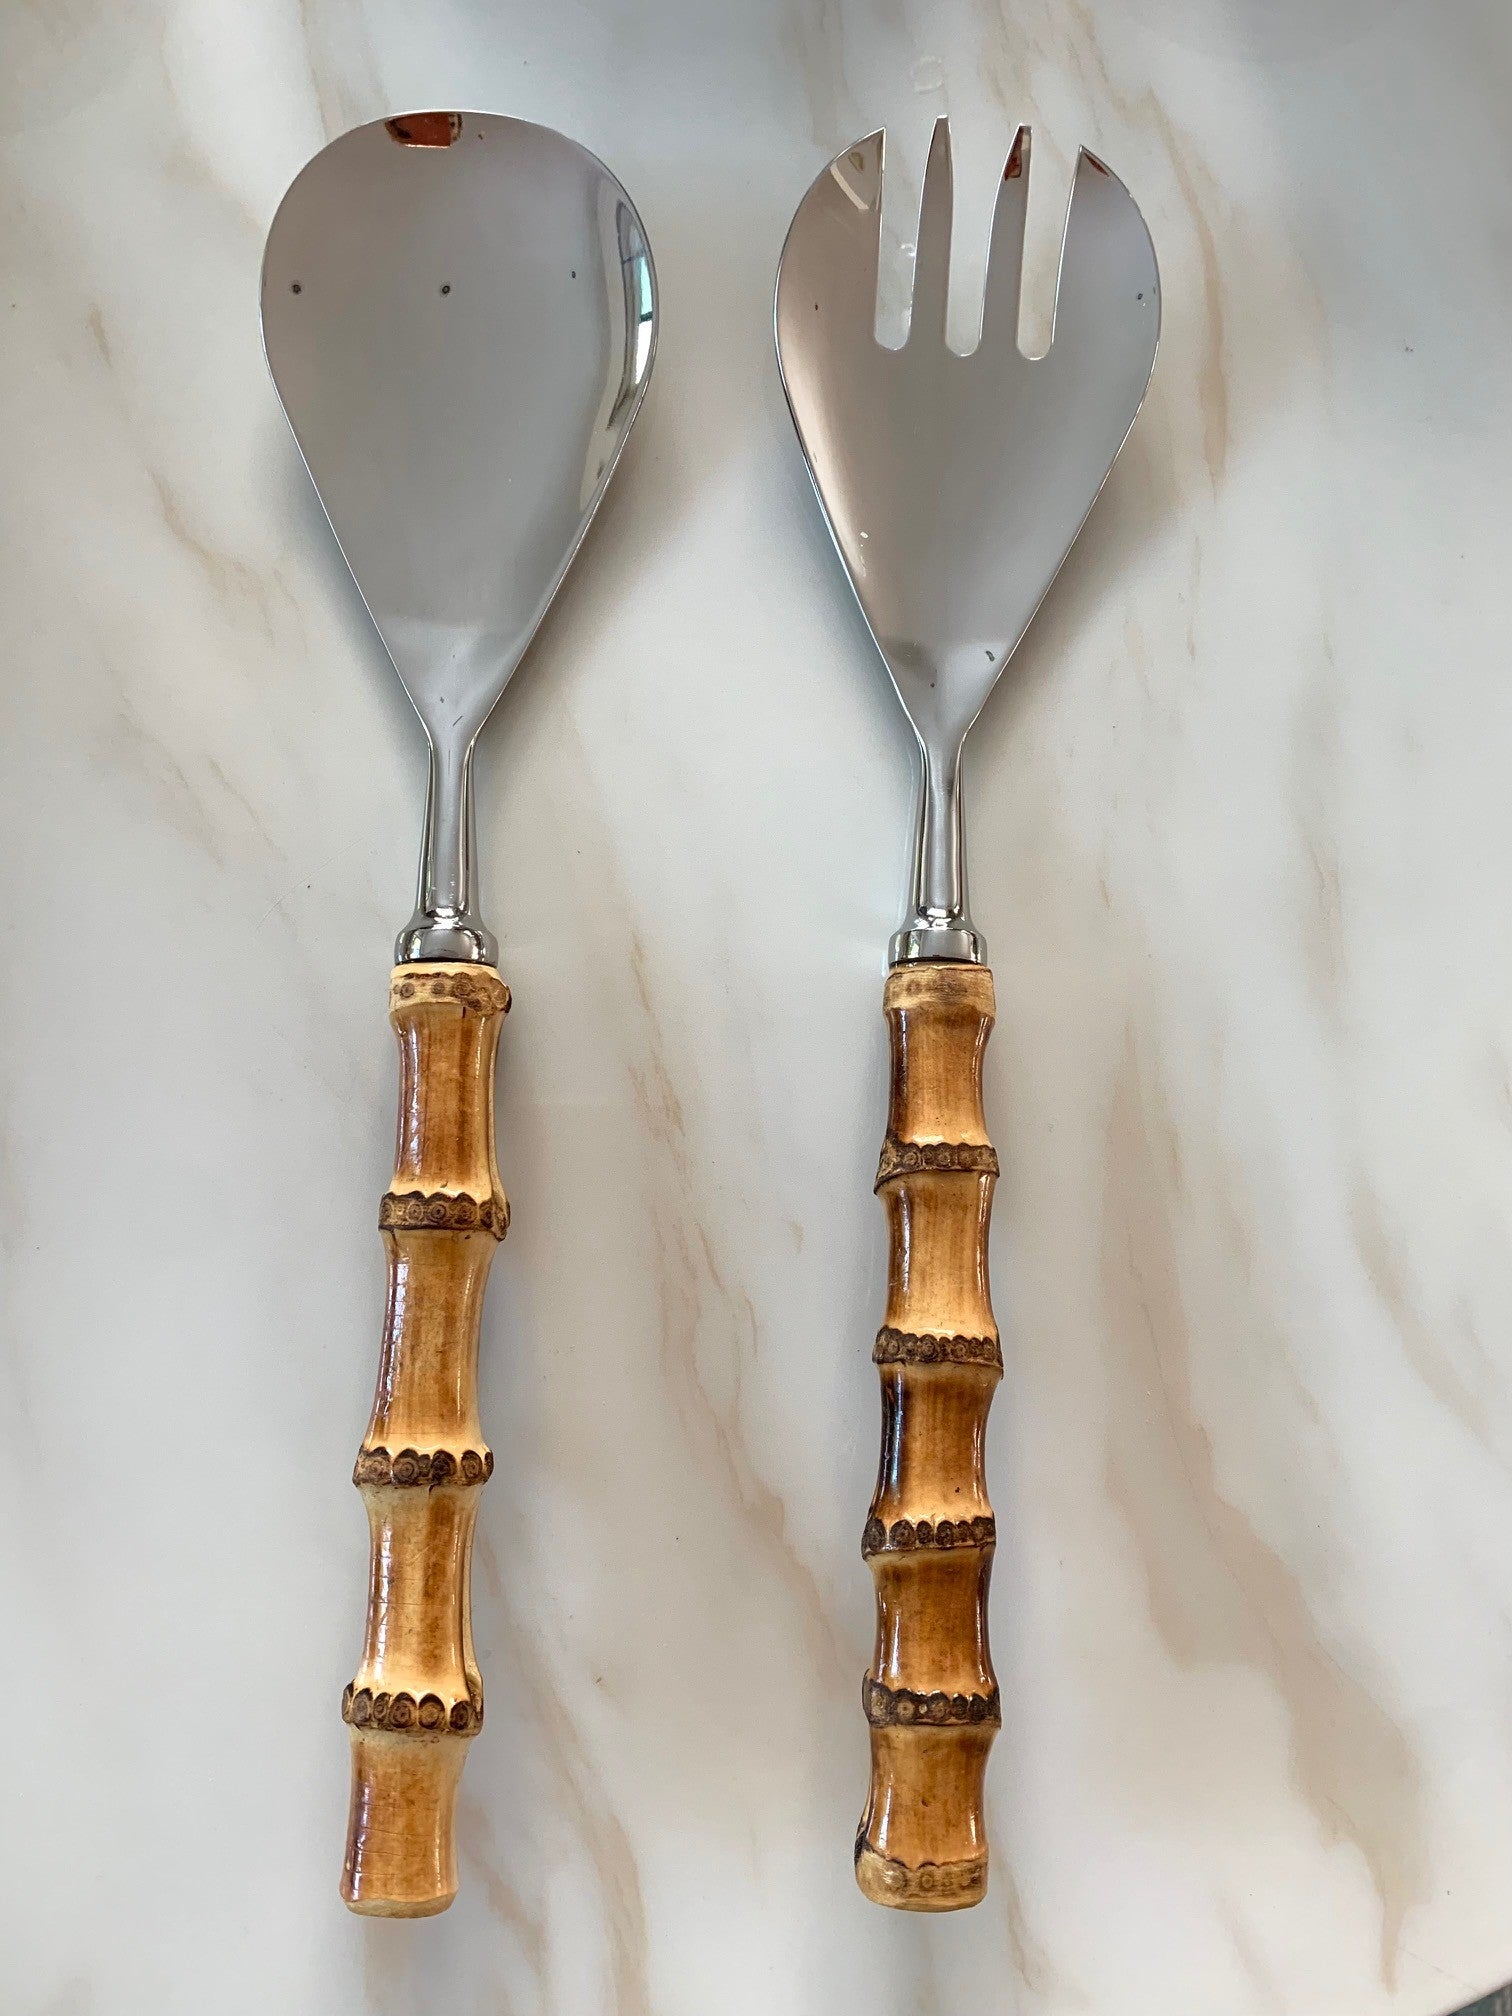 A bamboo serving set comprising of a serving spoon and a serving fork